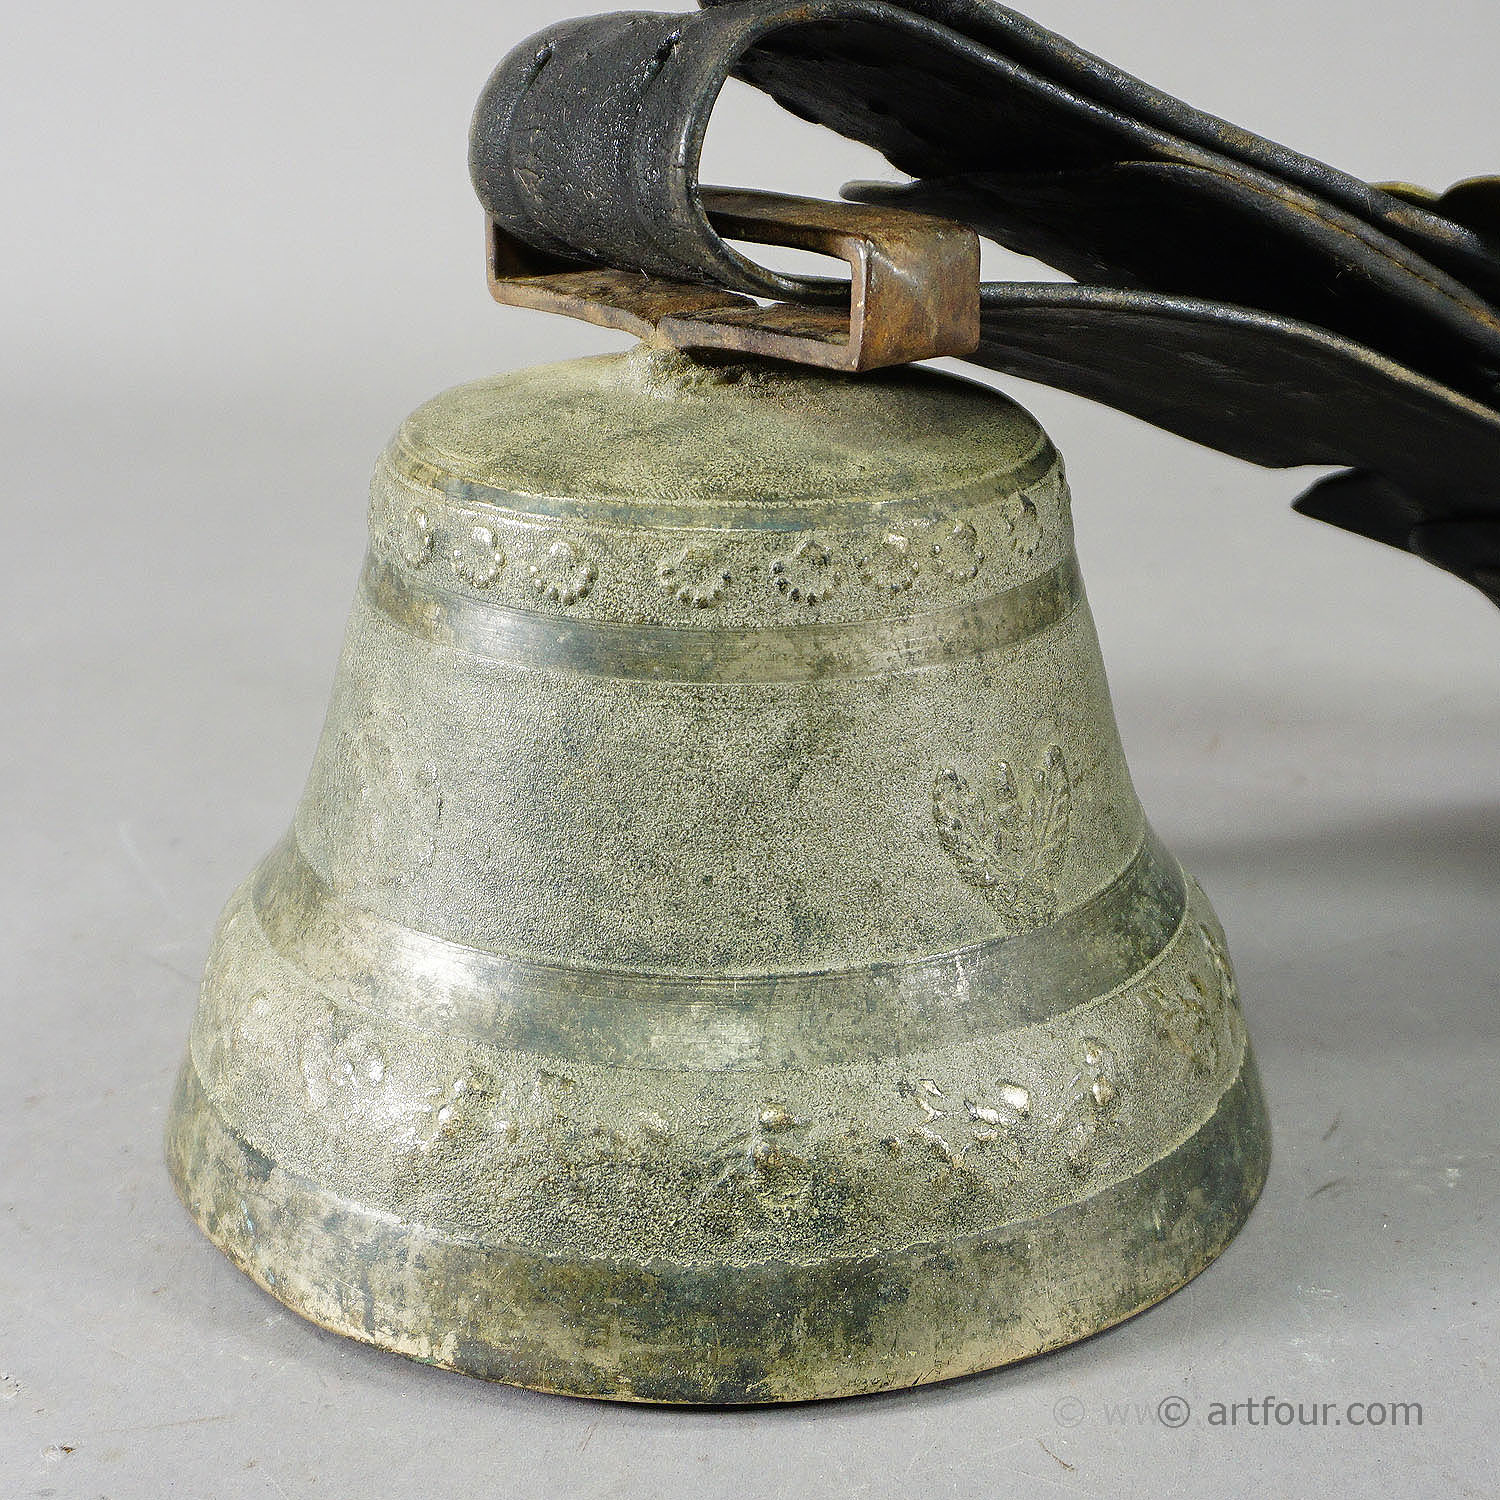 Antique Casted Bronze Cattle Bell Made in Switzerland ca. 1930